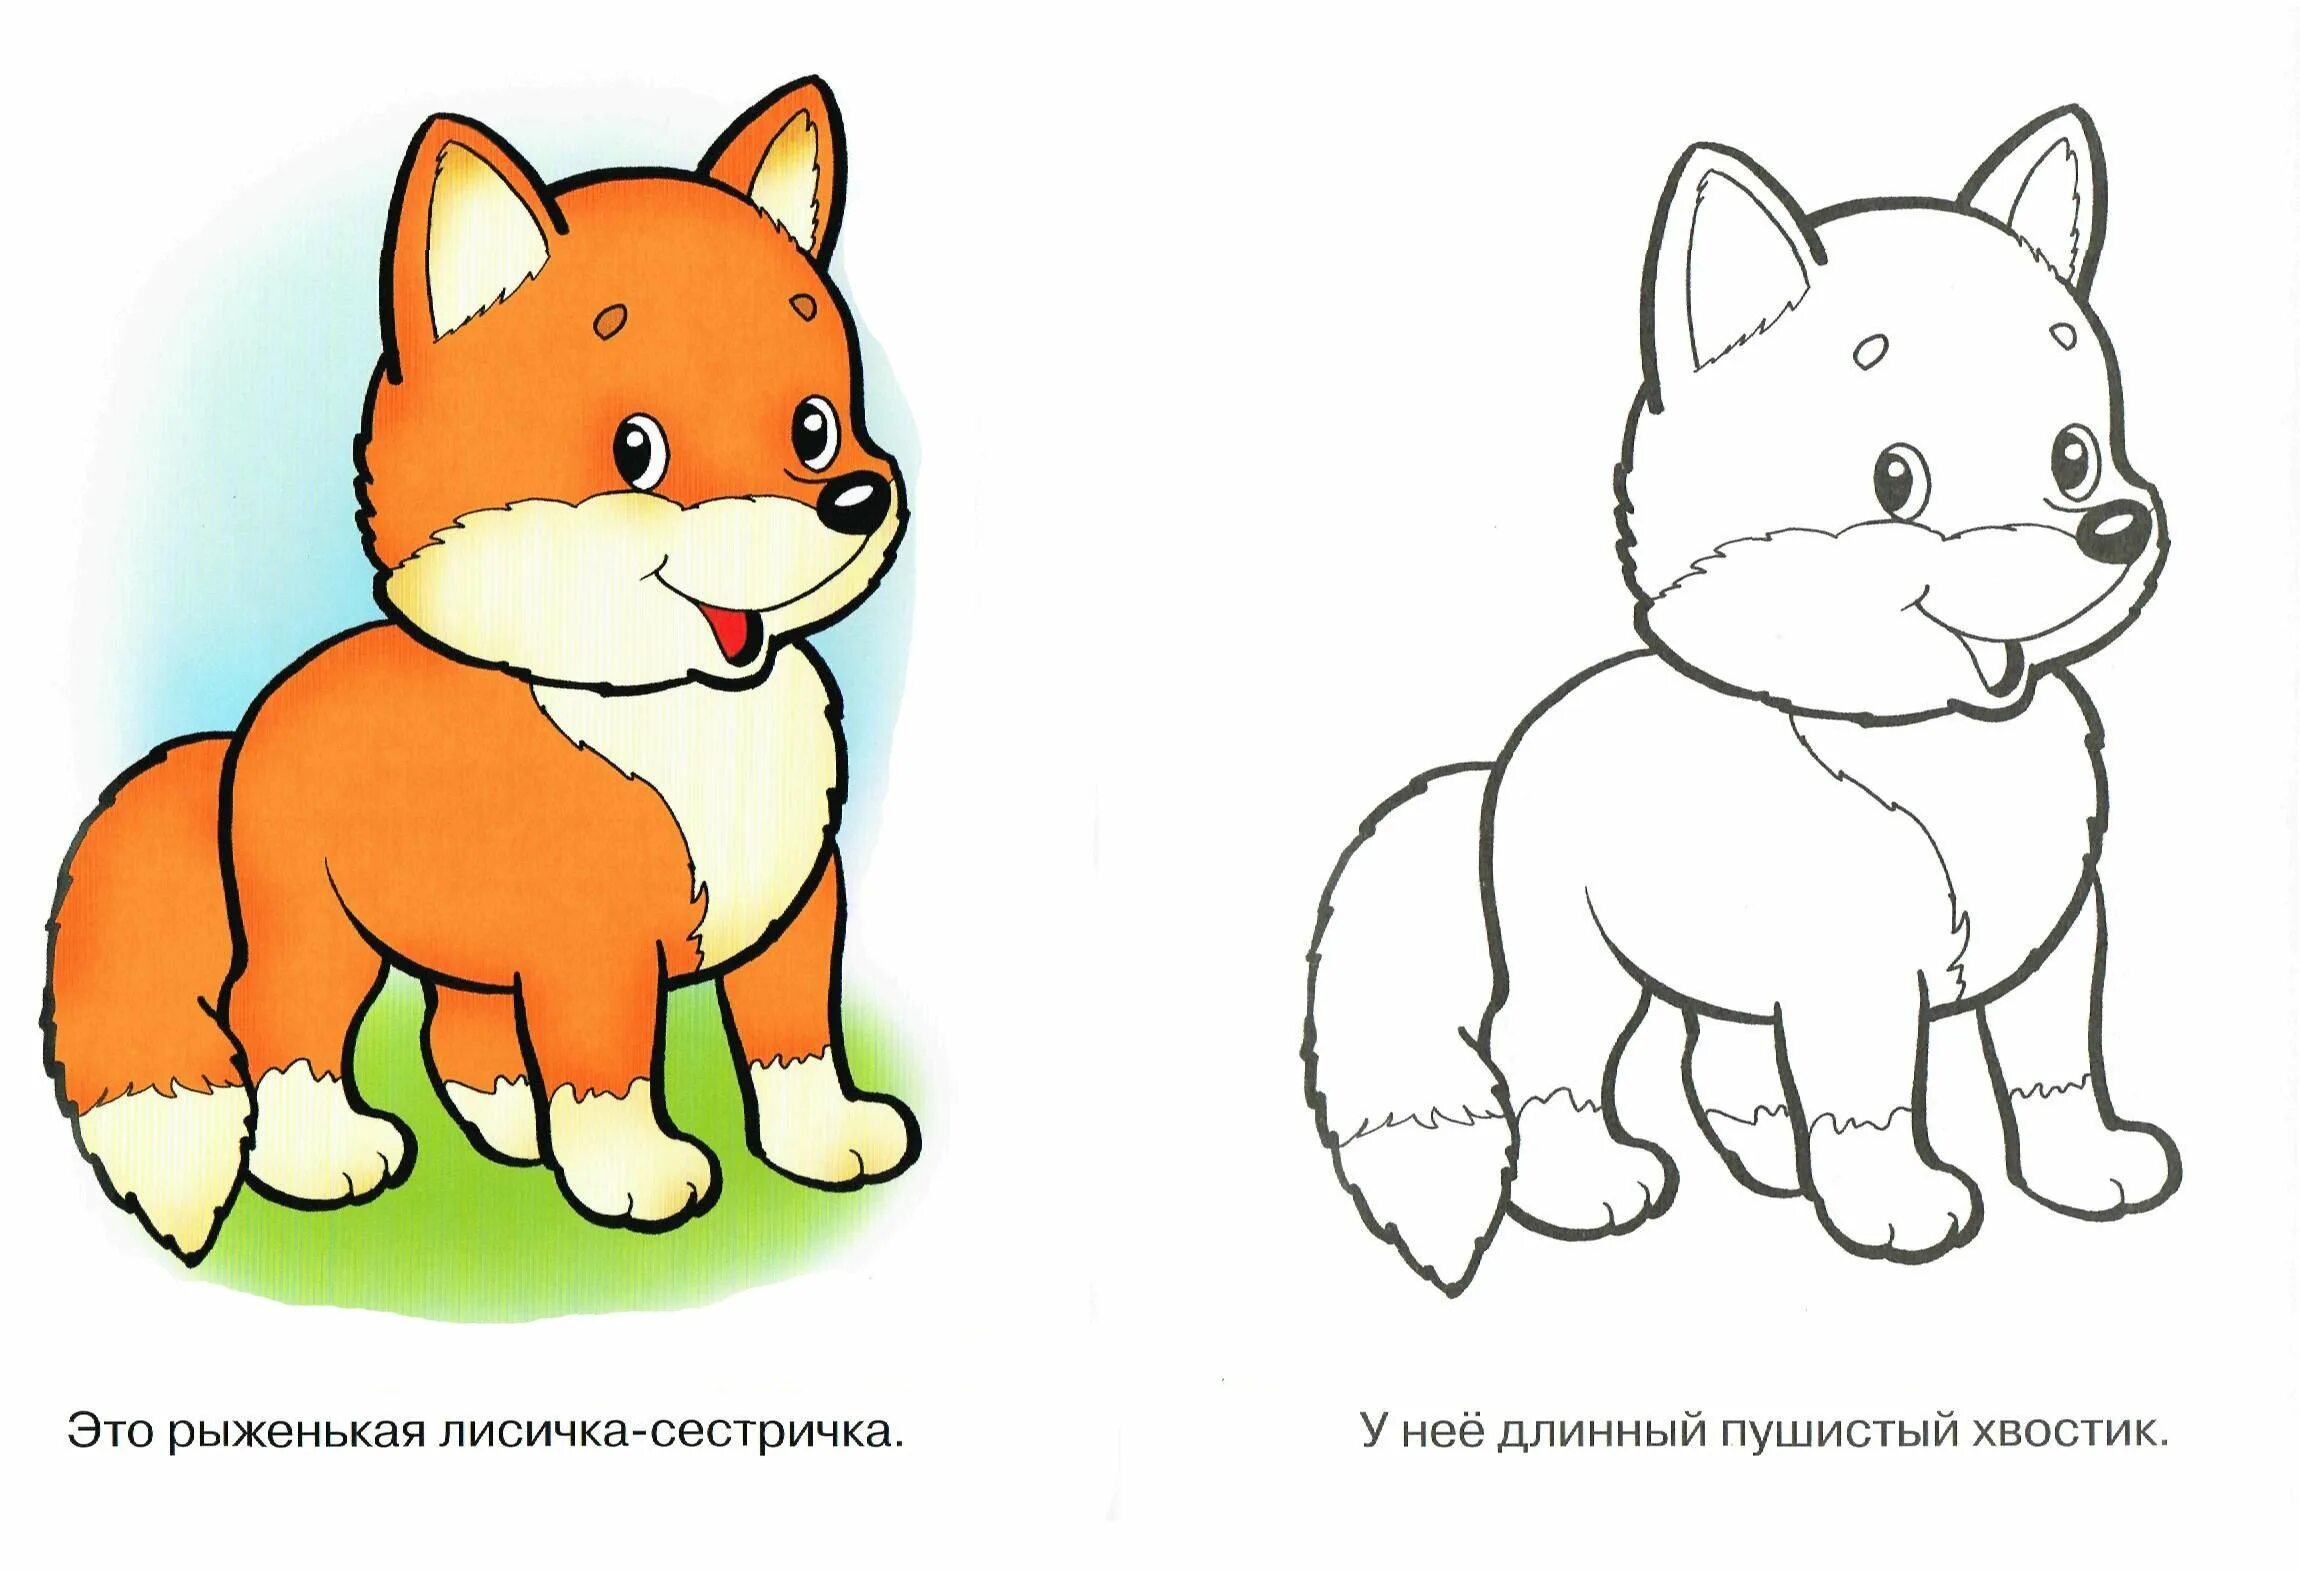 Glamorous fox coloring book for children 2-3 years old